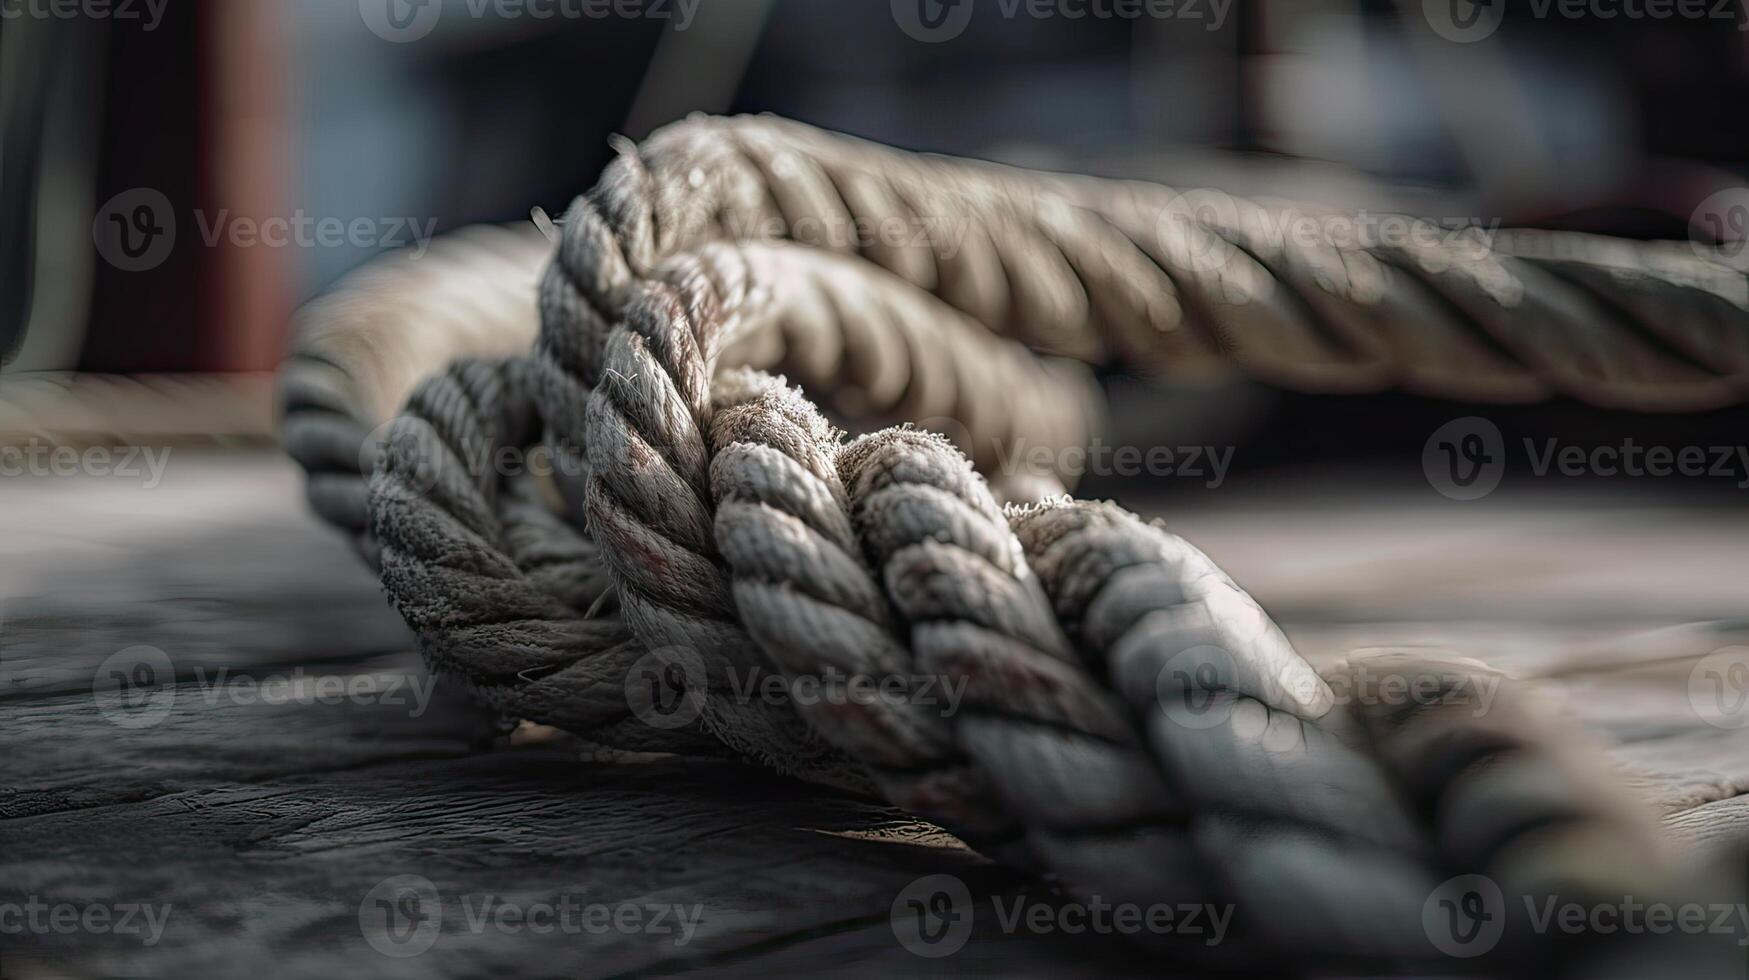 ropes of an old sailing ship Gorch Fock. . photo